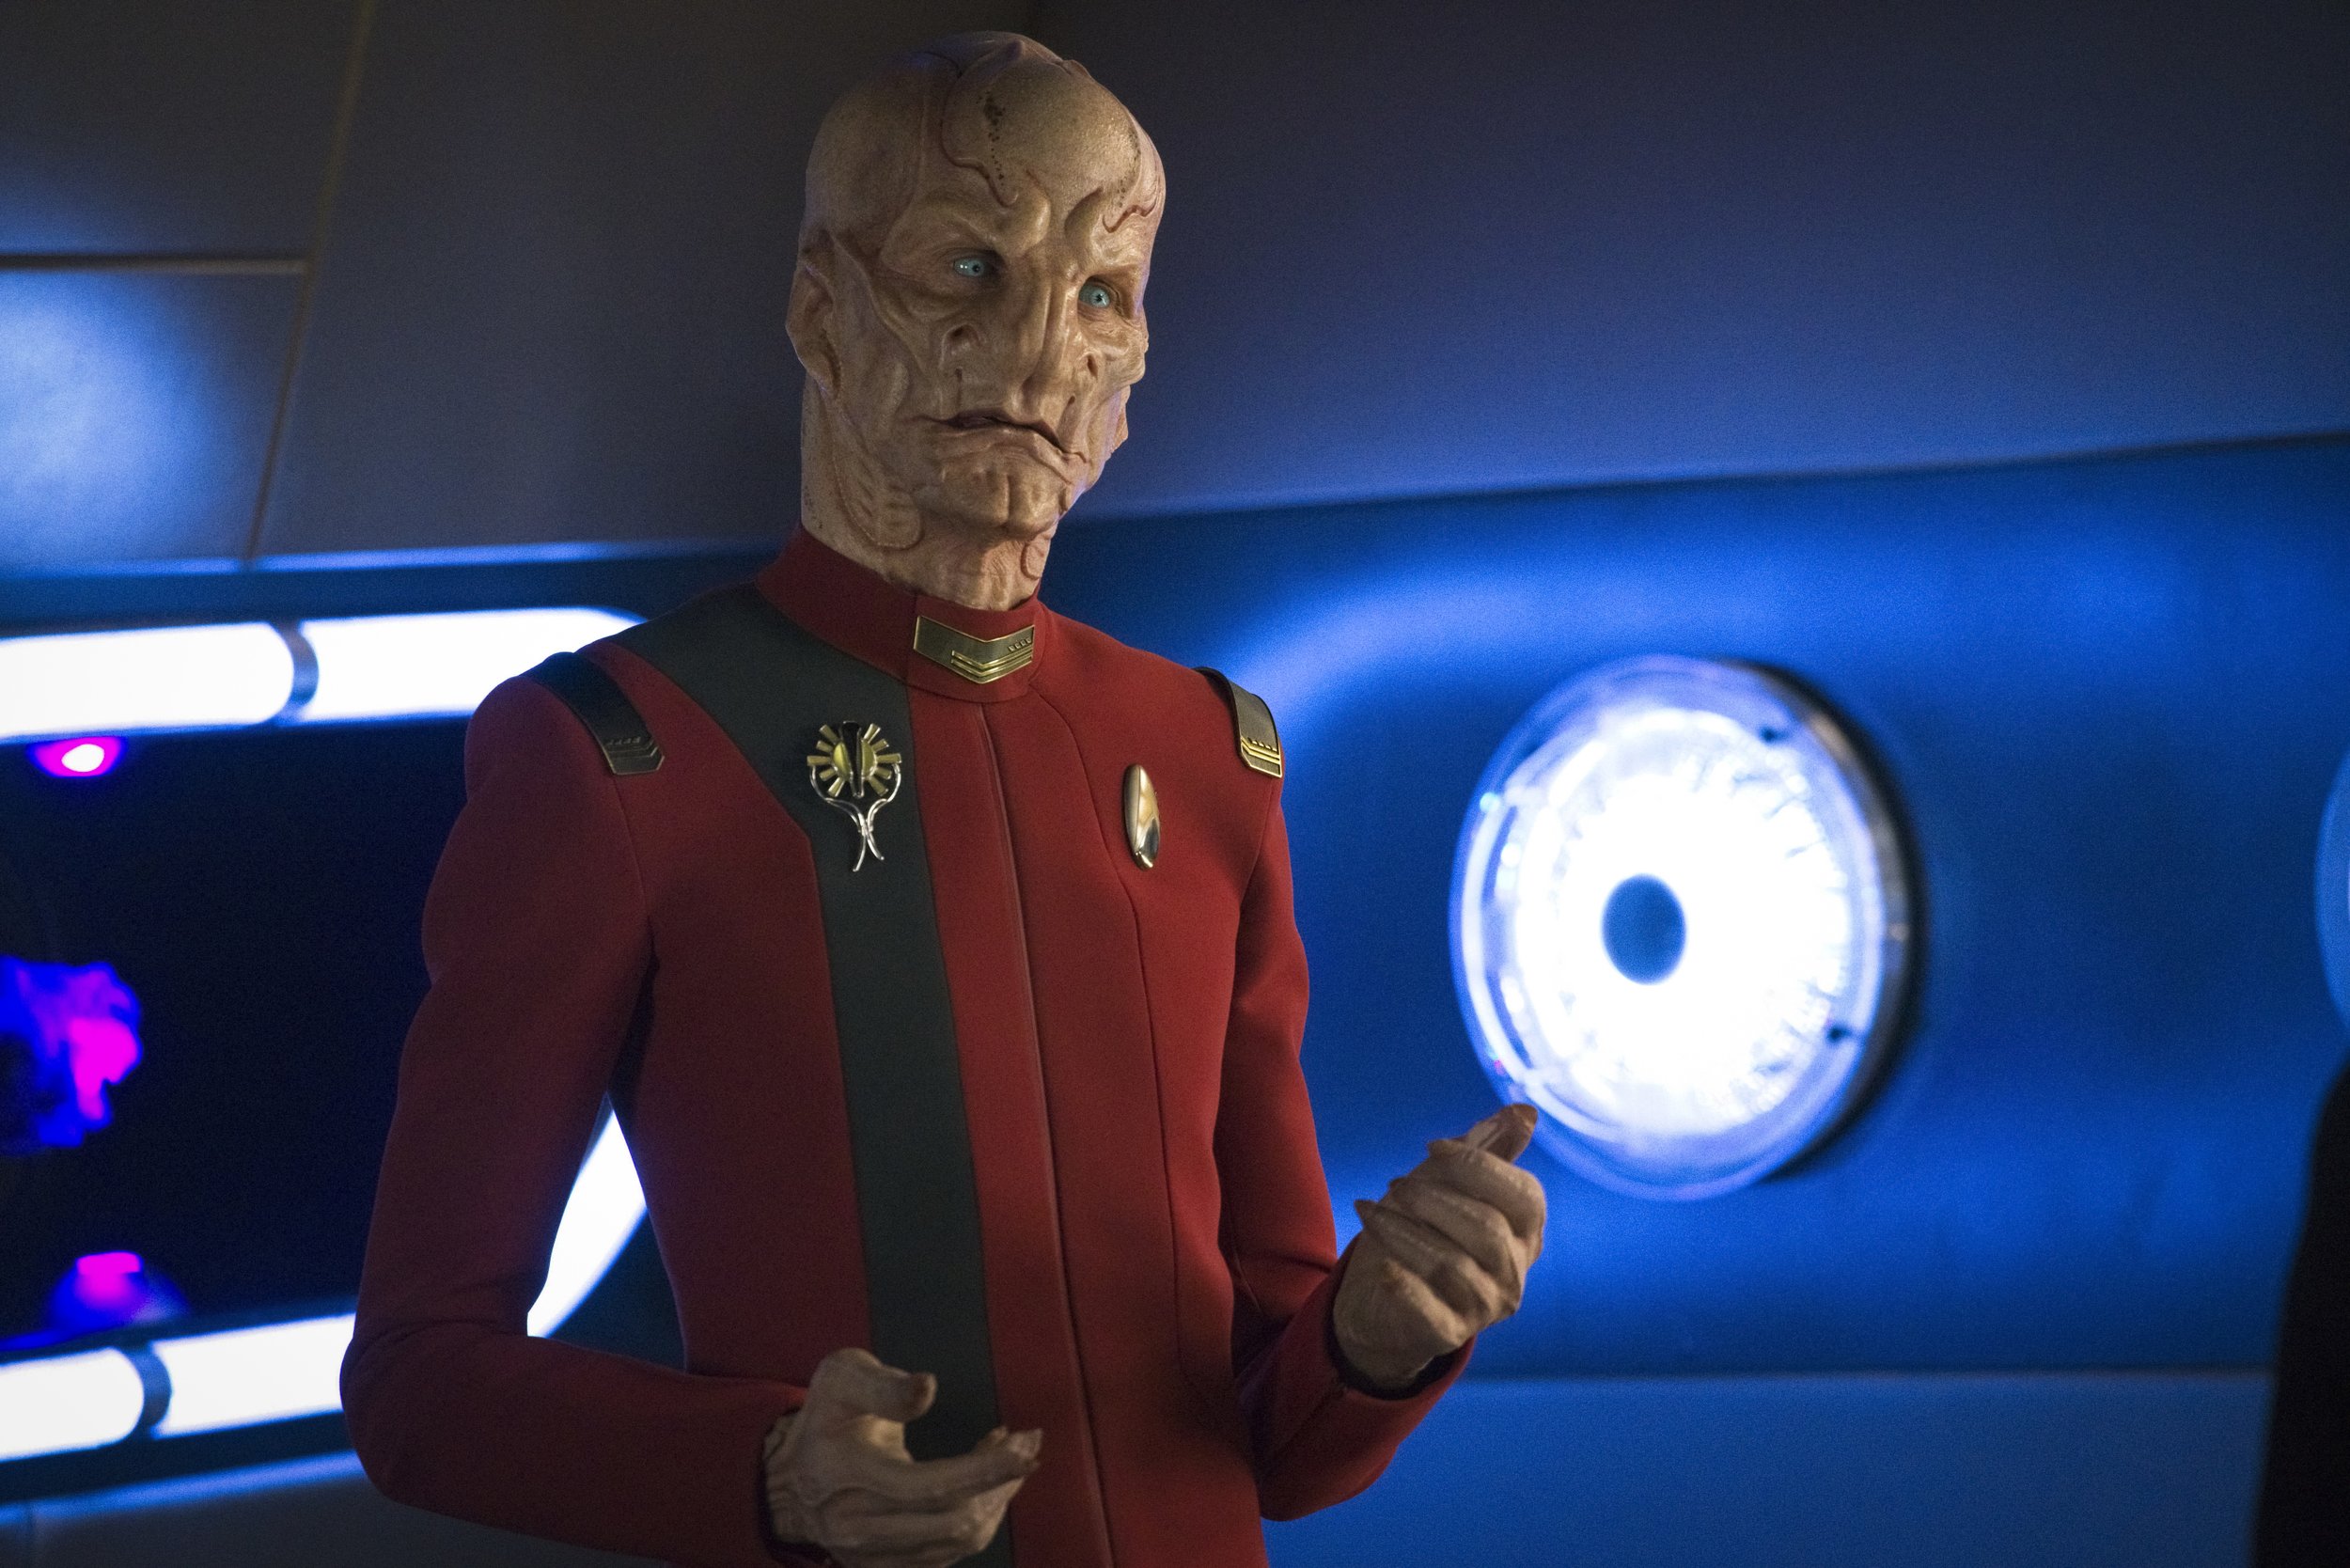   Pictured: Doug Jones as Saru of the Paramount+ original series STAR TREK: DISCOVERY. Photo Cr: Michael Gibson/Paramount+ (C) 2021 CBS Interactive. All Rights Reserved.  